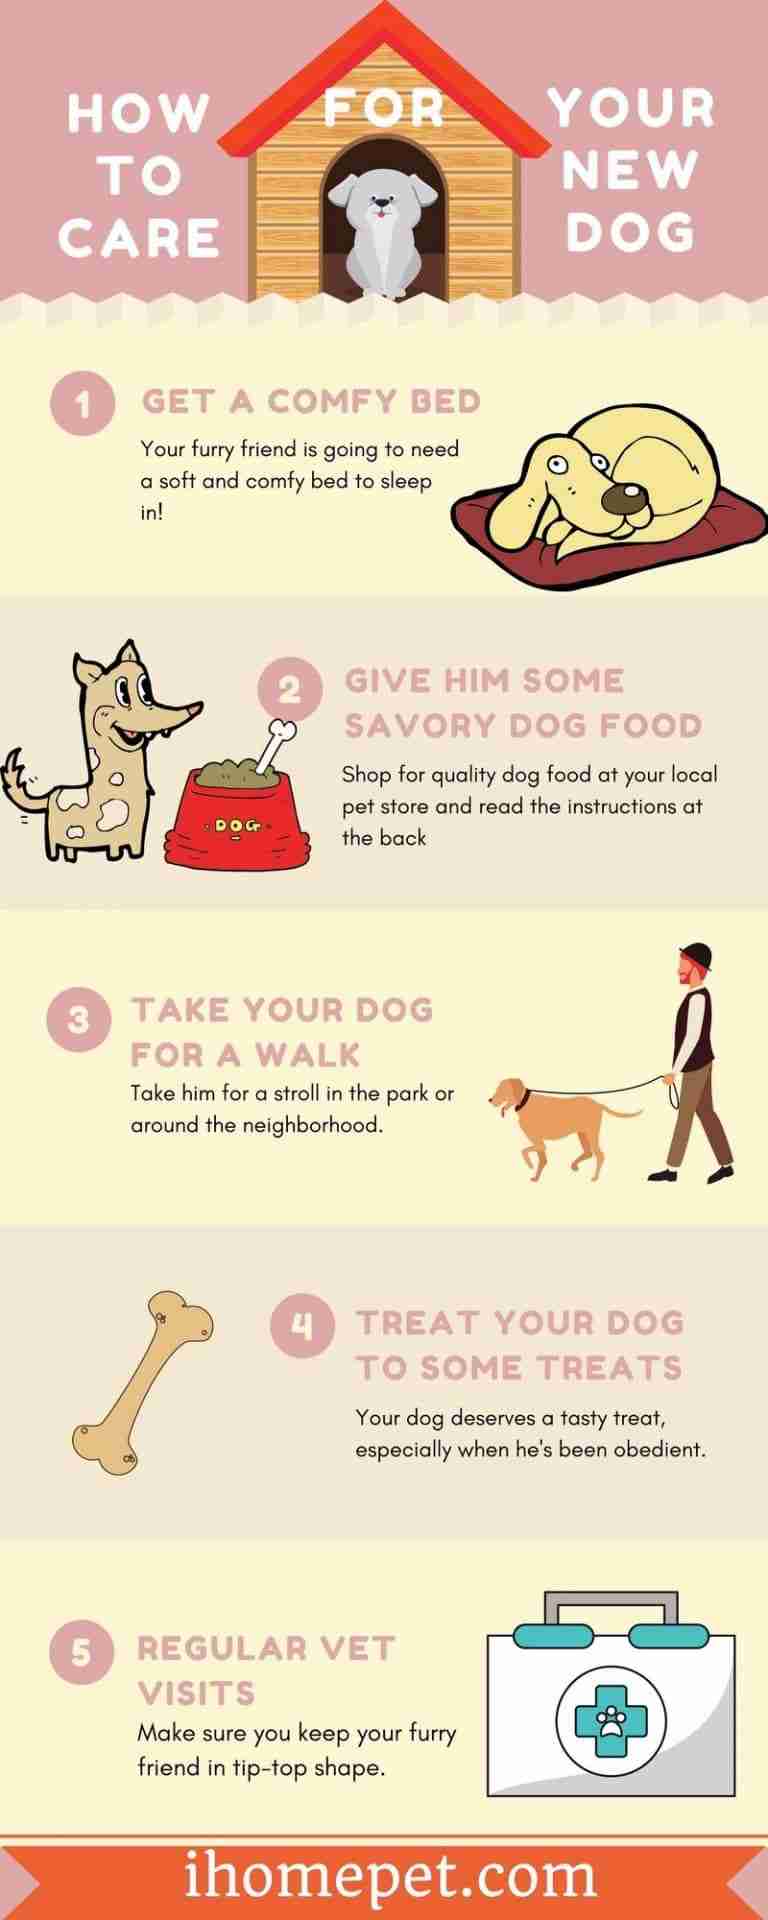 [Infographic] How To Care For Your New Dog: The Easy Way